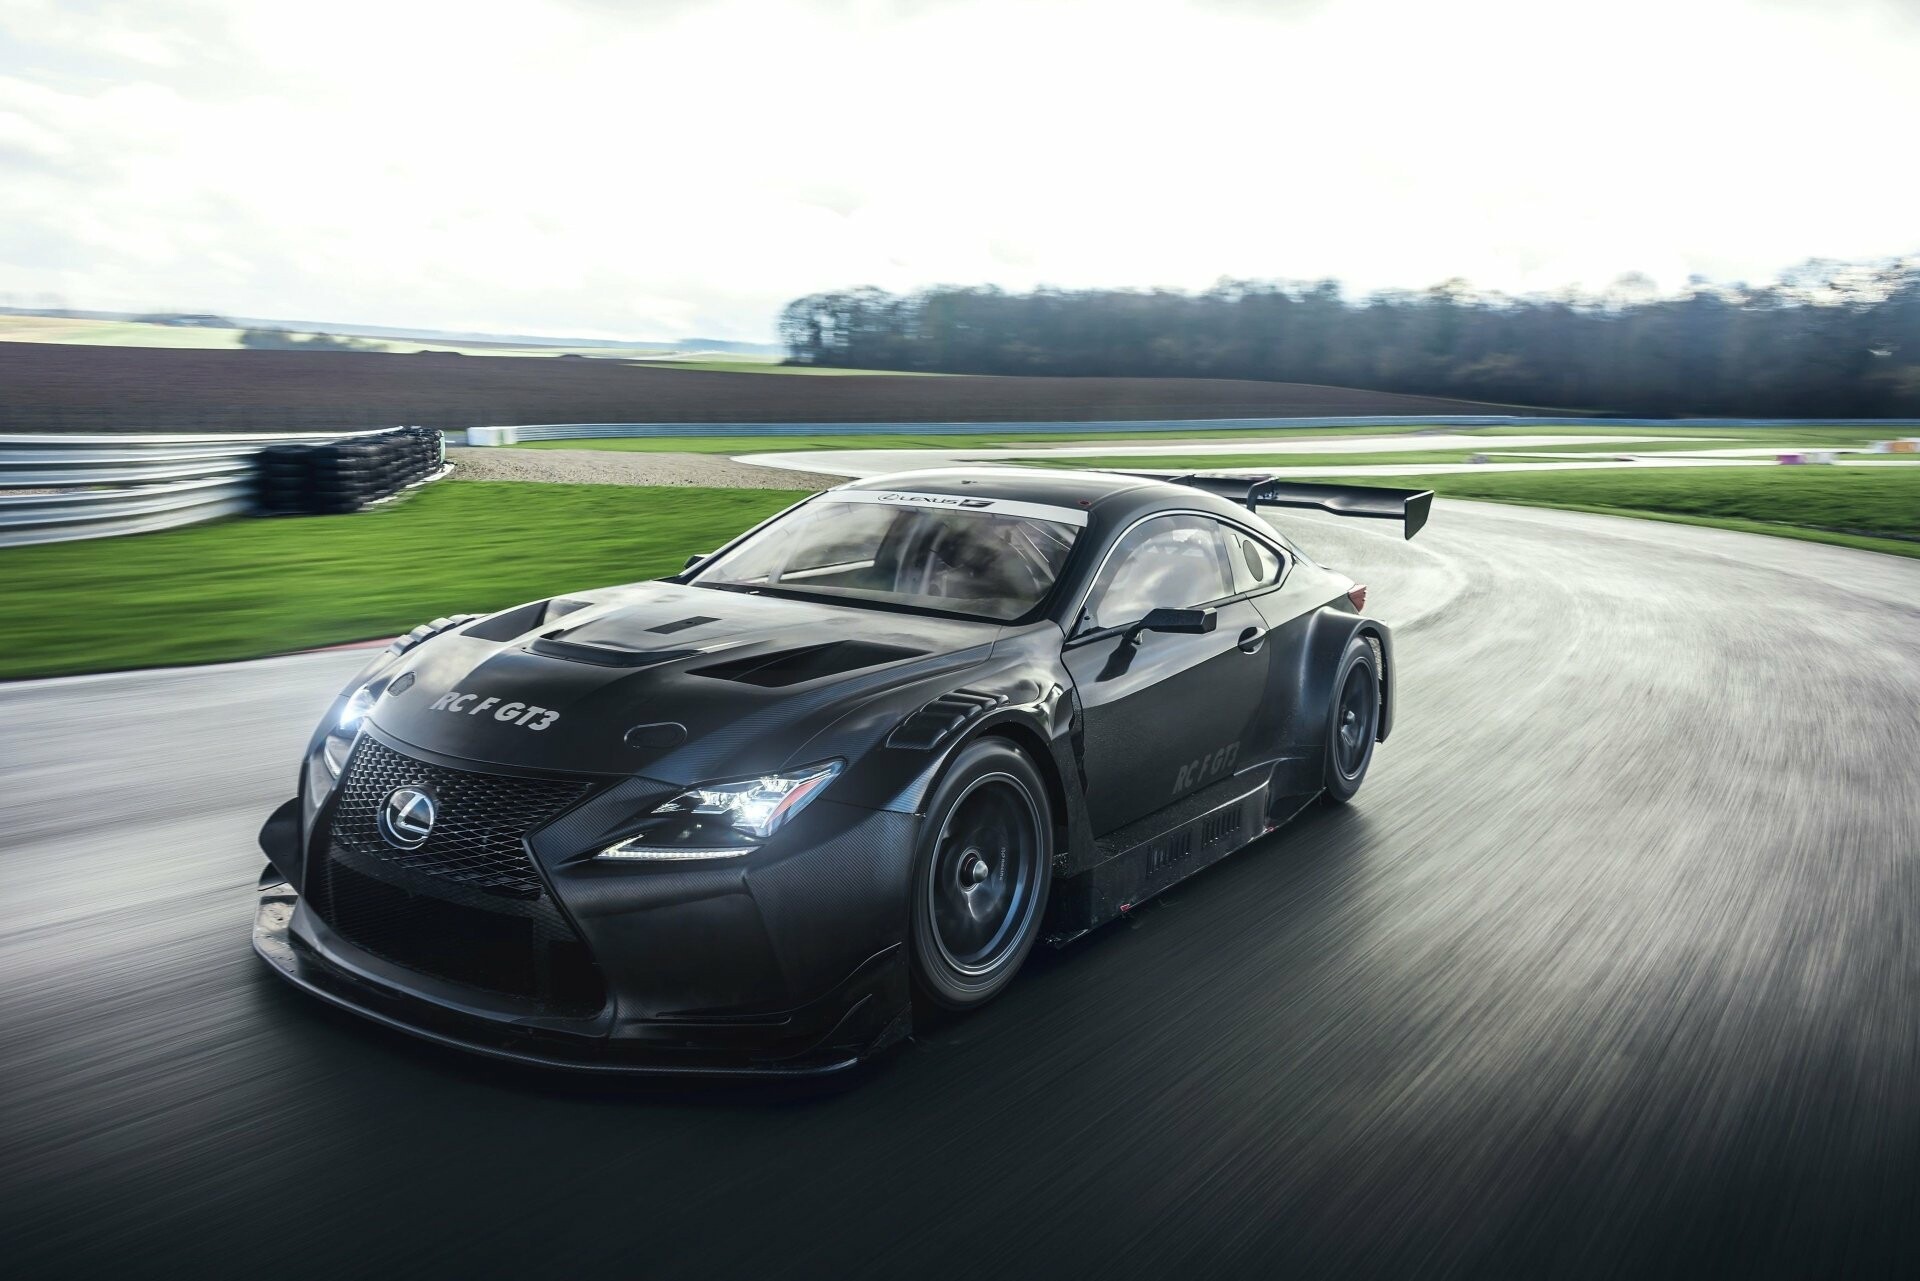 Lexus: RC F GT3, A racing version of its RC F coupe, 5.4-liter V8 engine. 1920x1290 HD Wallpaper.